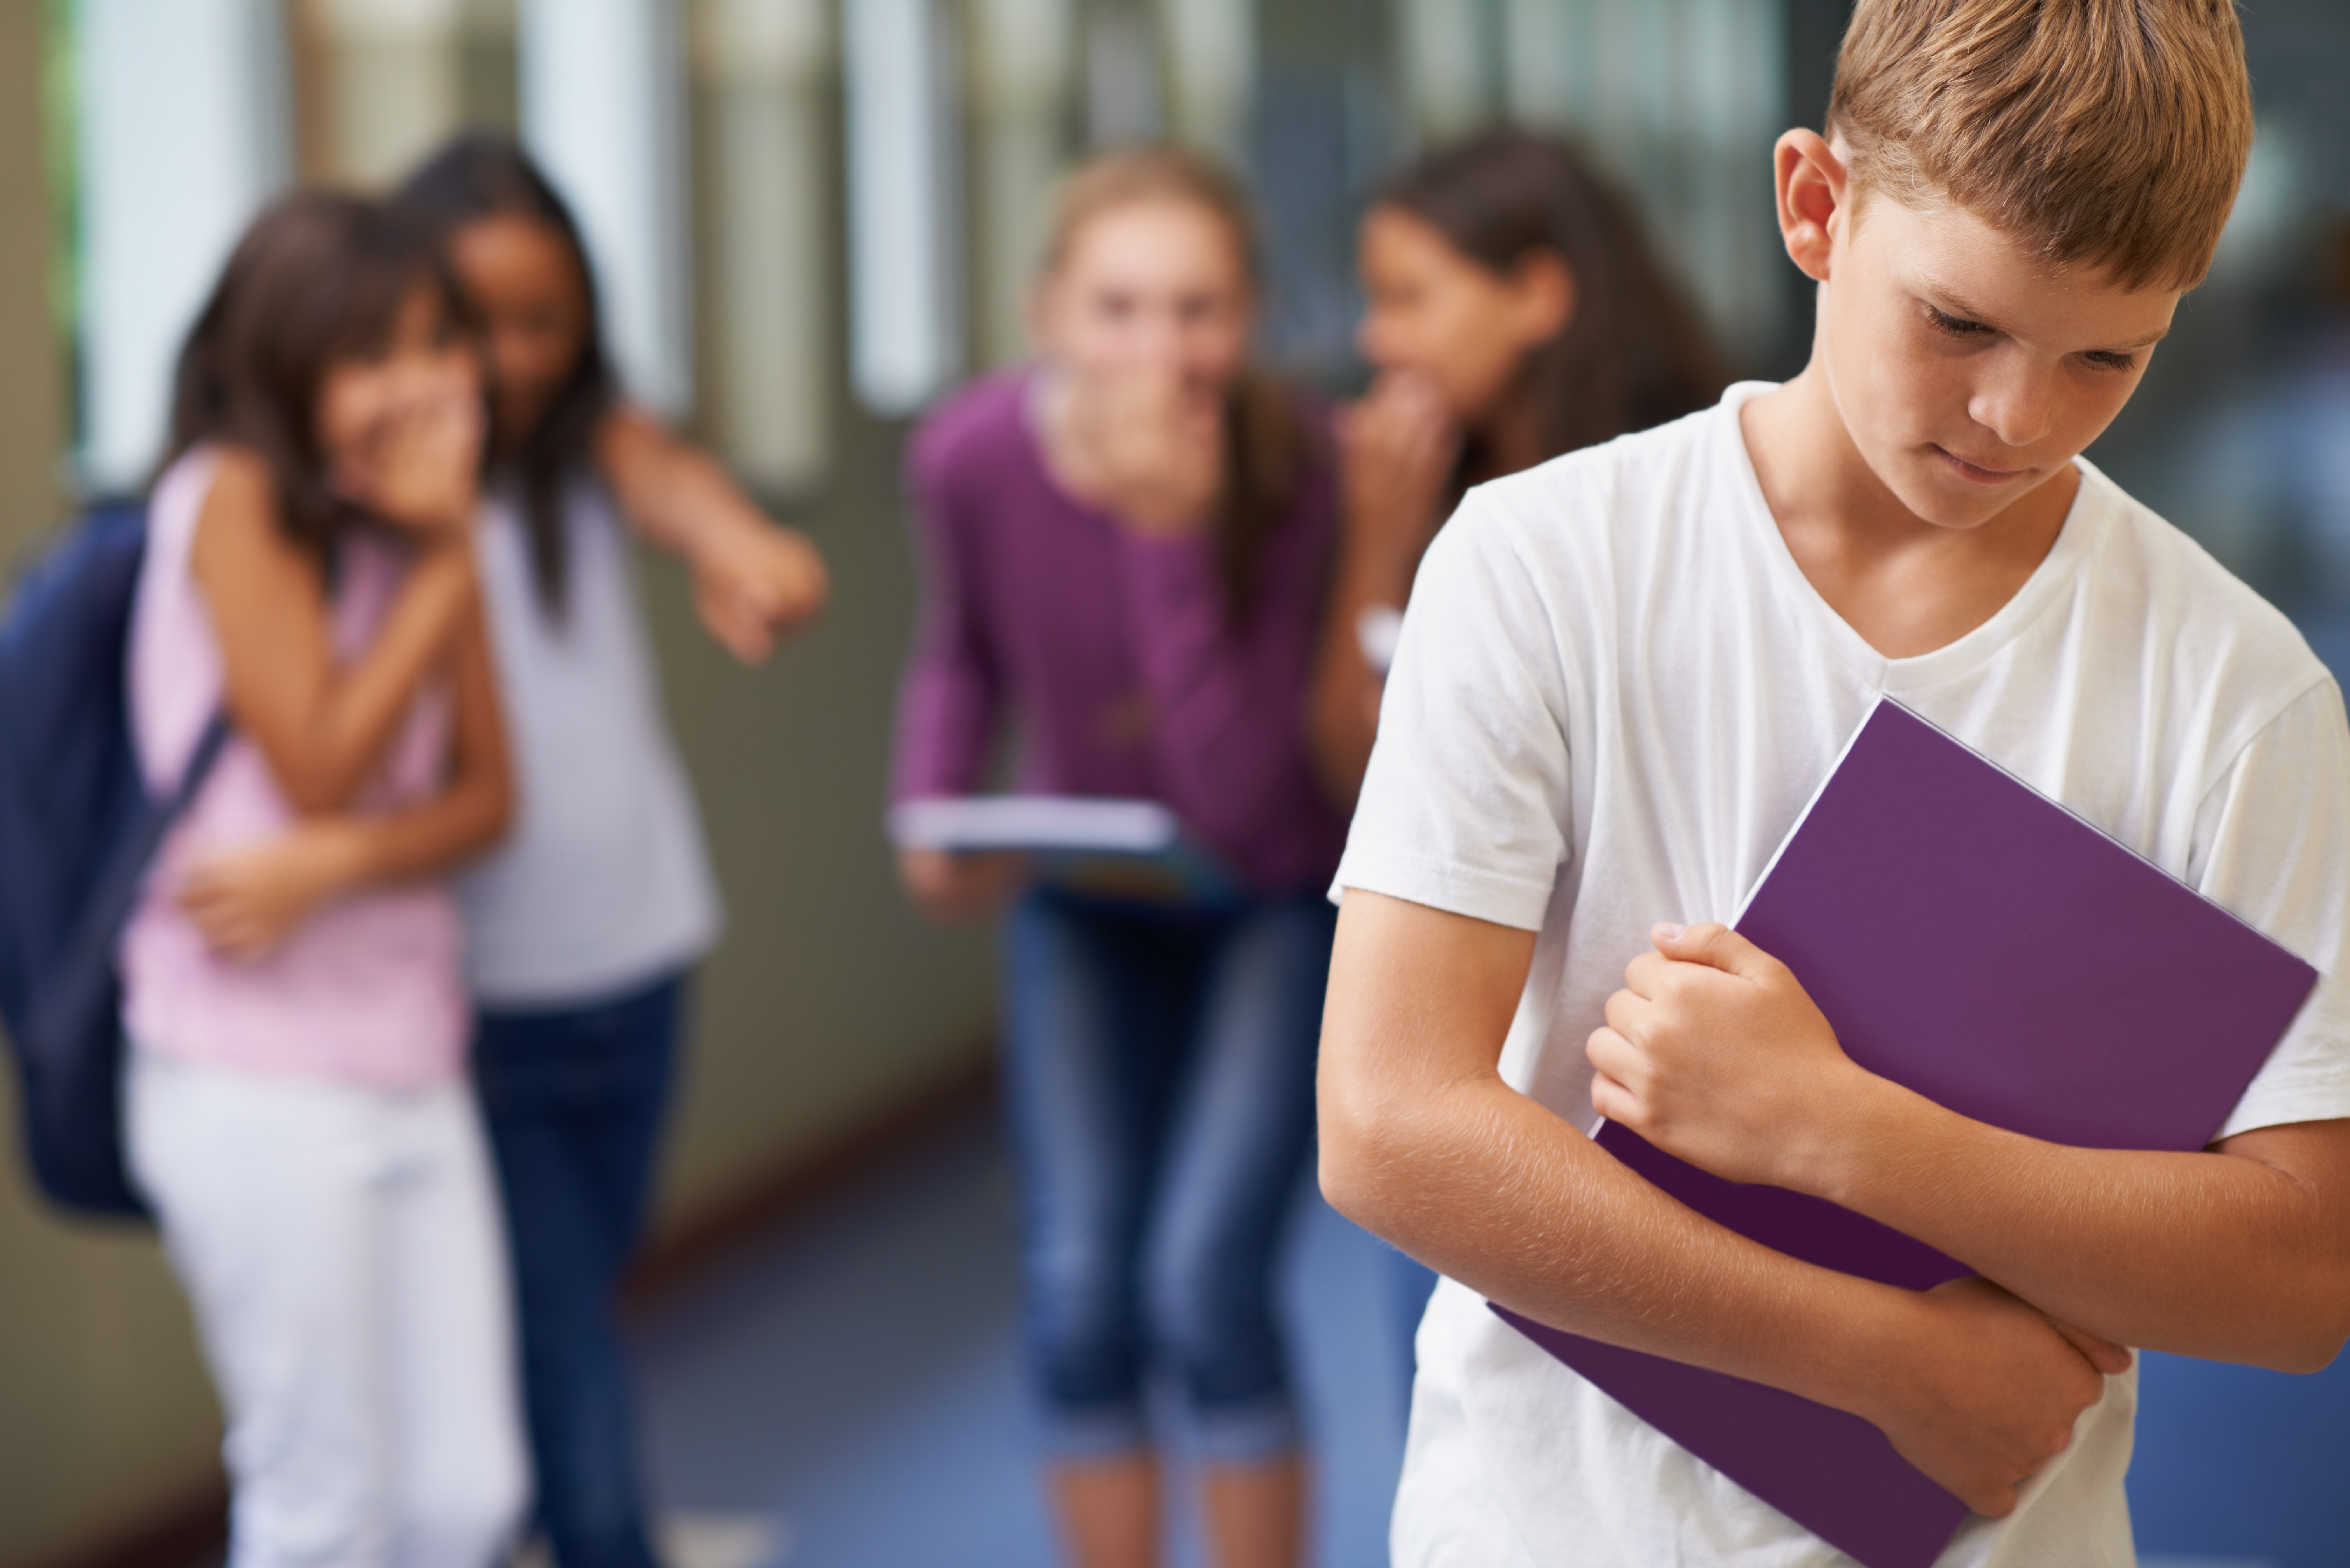 School children bullying another child at school | Source: Shutterstock